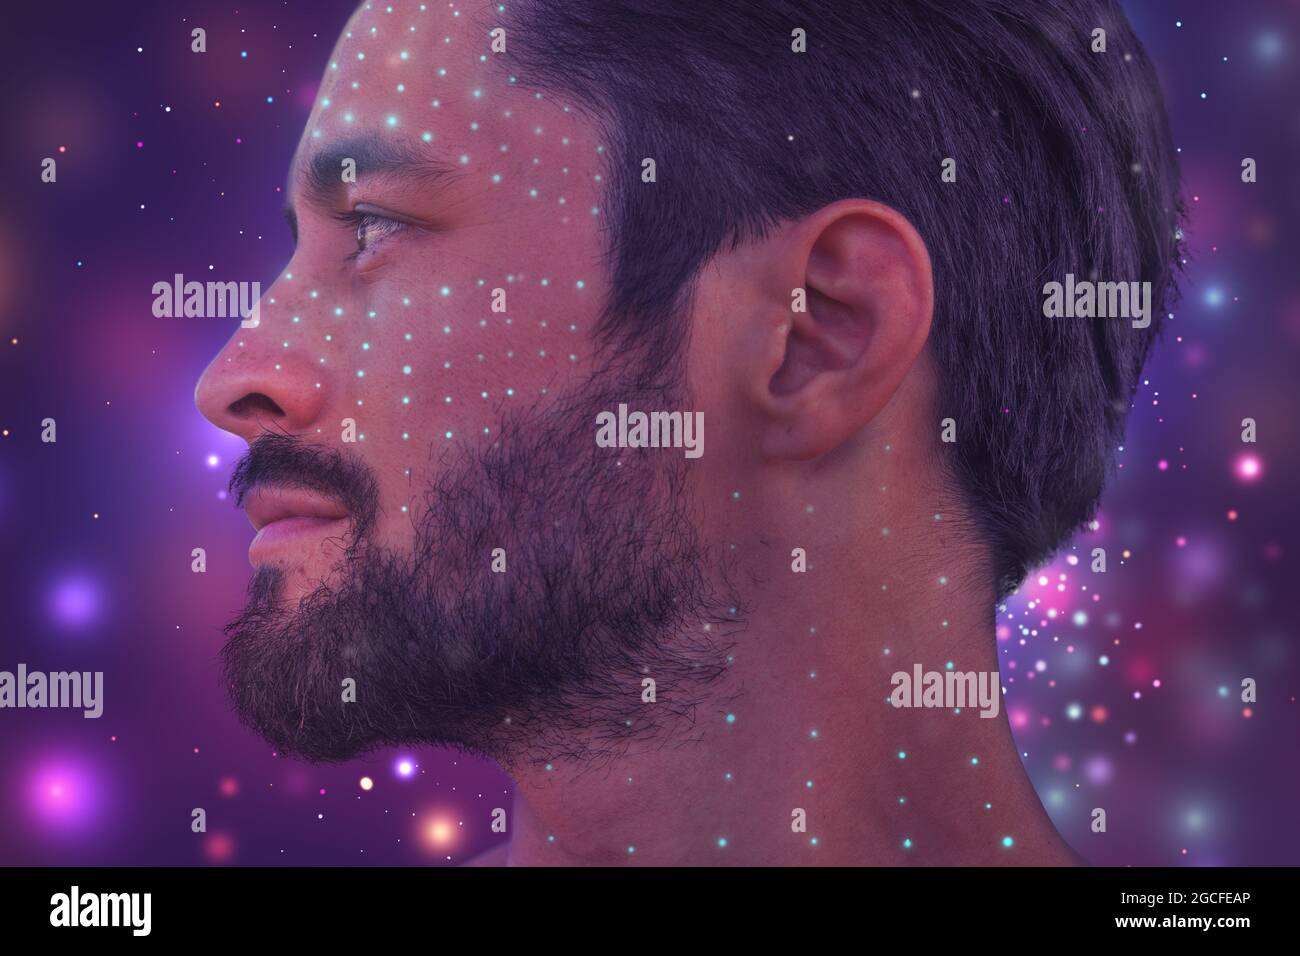 A digitally manipulated artistic portrait of a man's profile on a colorful background Stock Photo